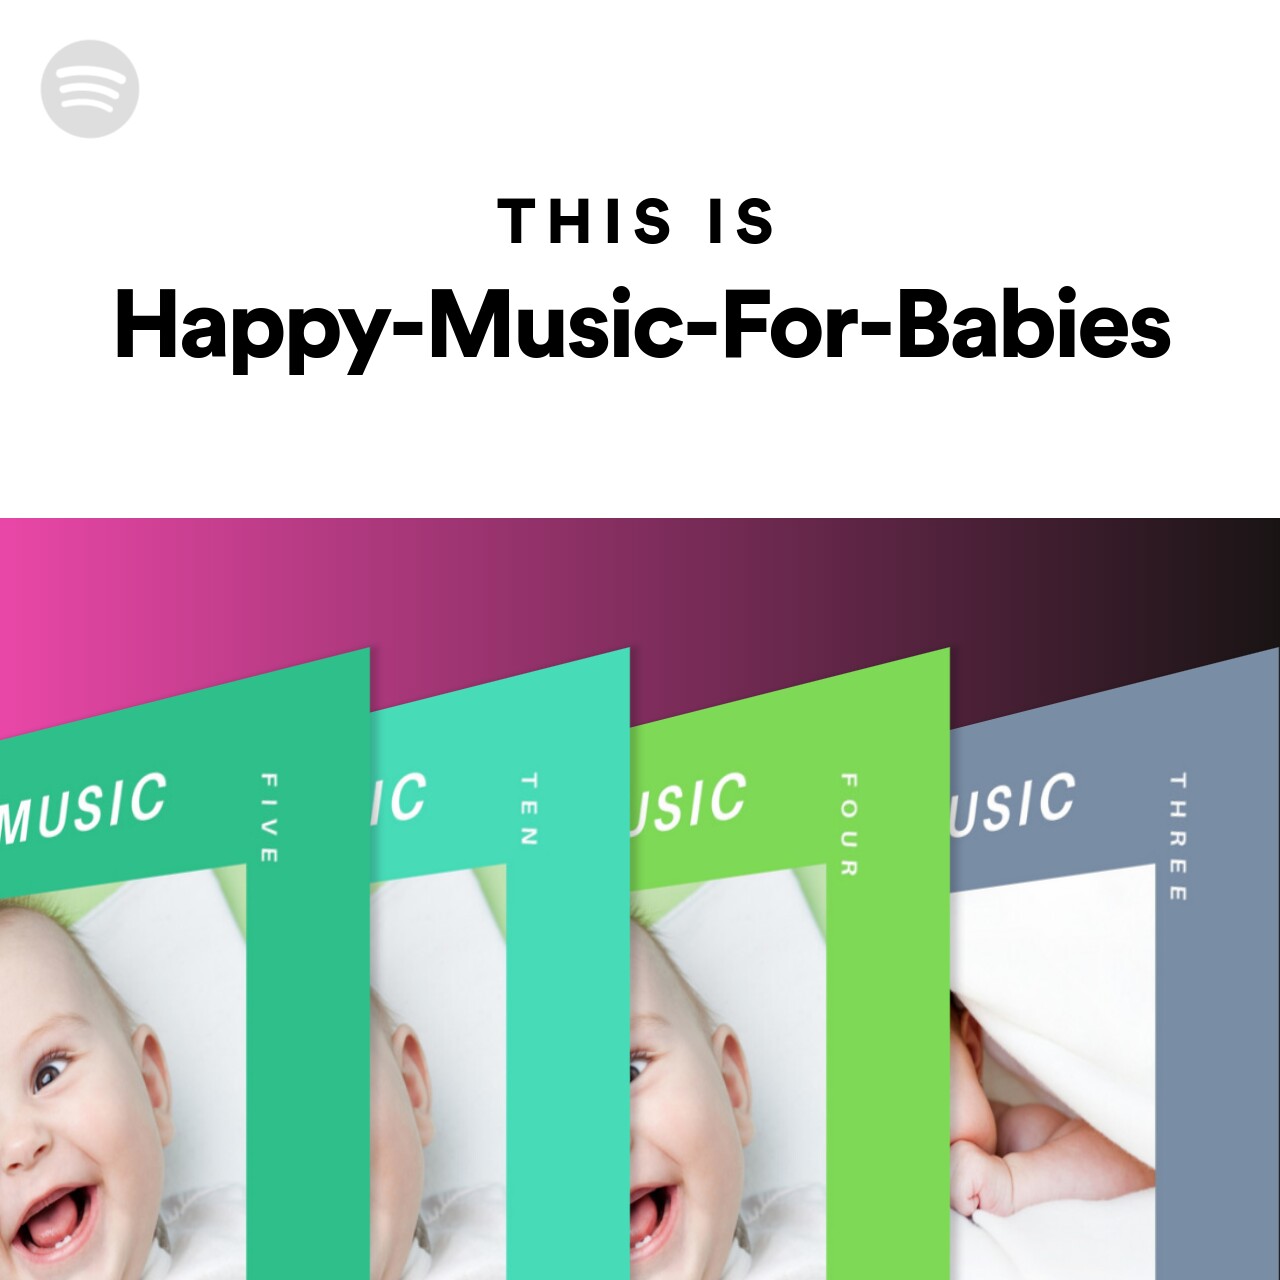 This Is Happy-Music-For-Babies